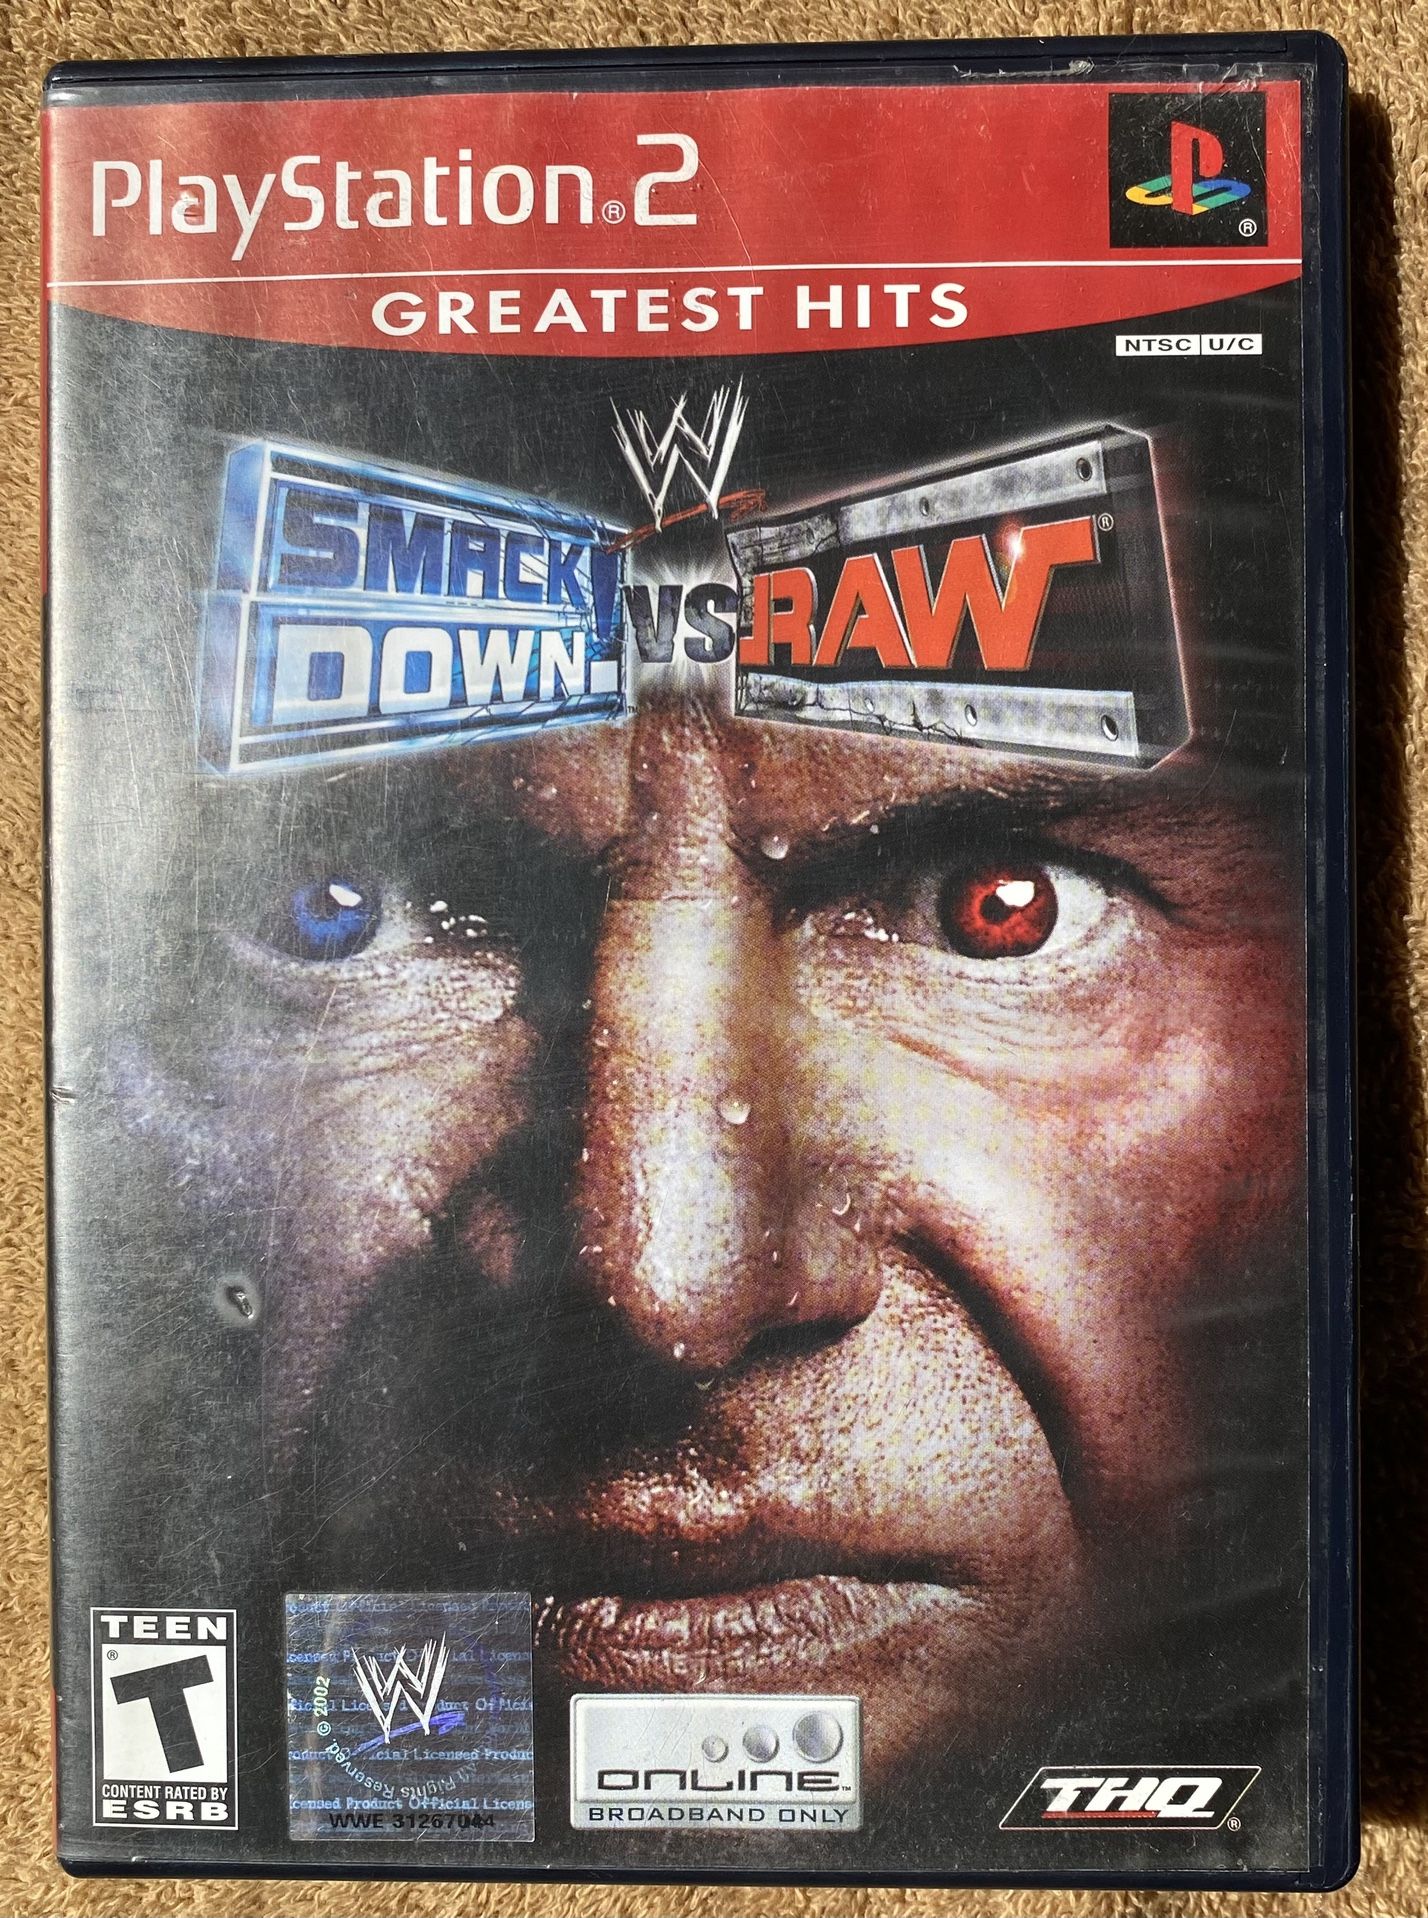 WWE SmackDown vs. Raw PS2 (Sony PlayStation 2, 2004) Complete & Tested!